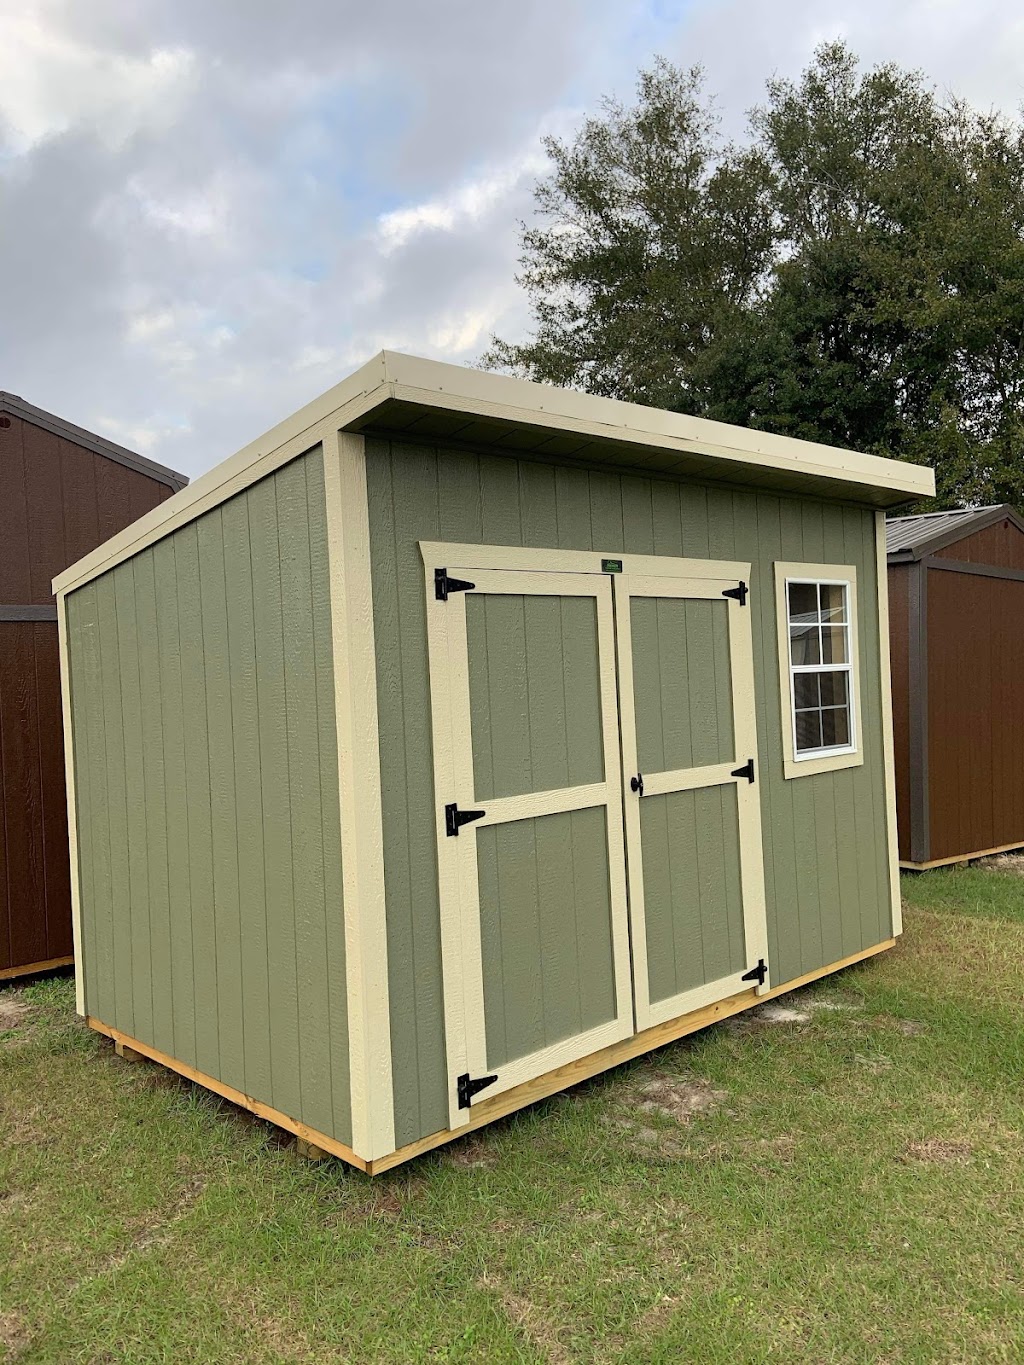 Grannys Trailers and Sheds - Deland | 2827 New York Ave W, DeLand, FL 32720 | Phone: (321) 961-3112